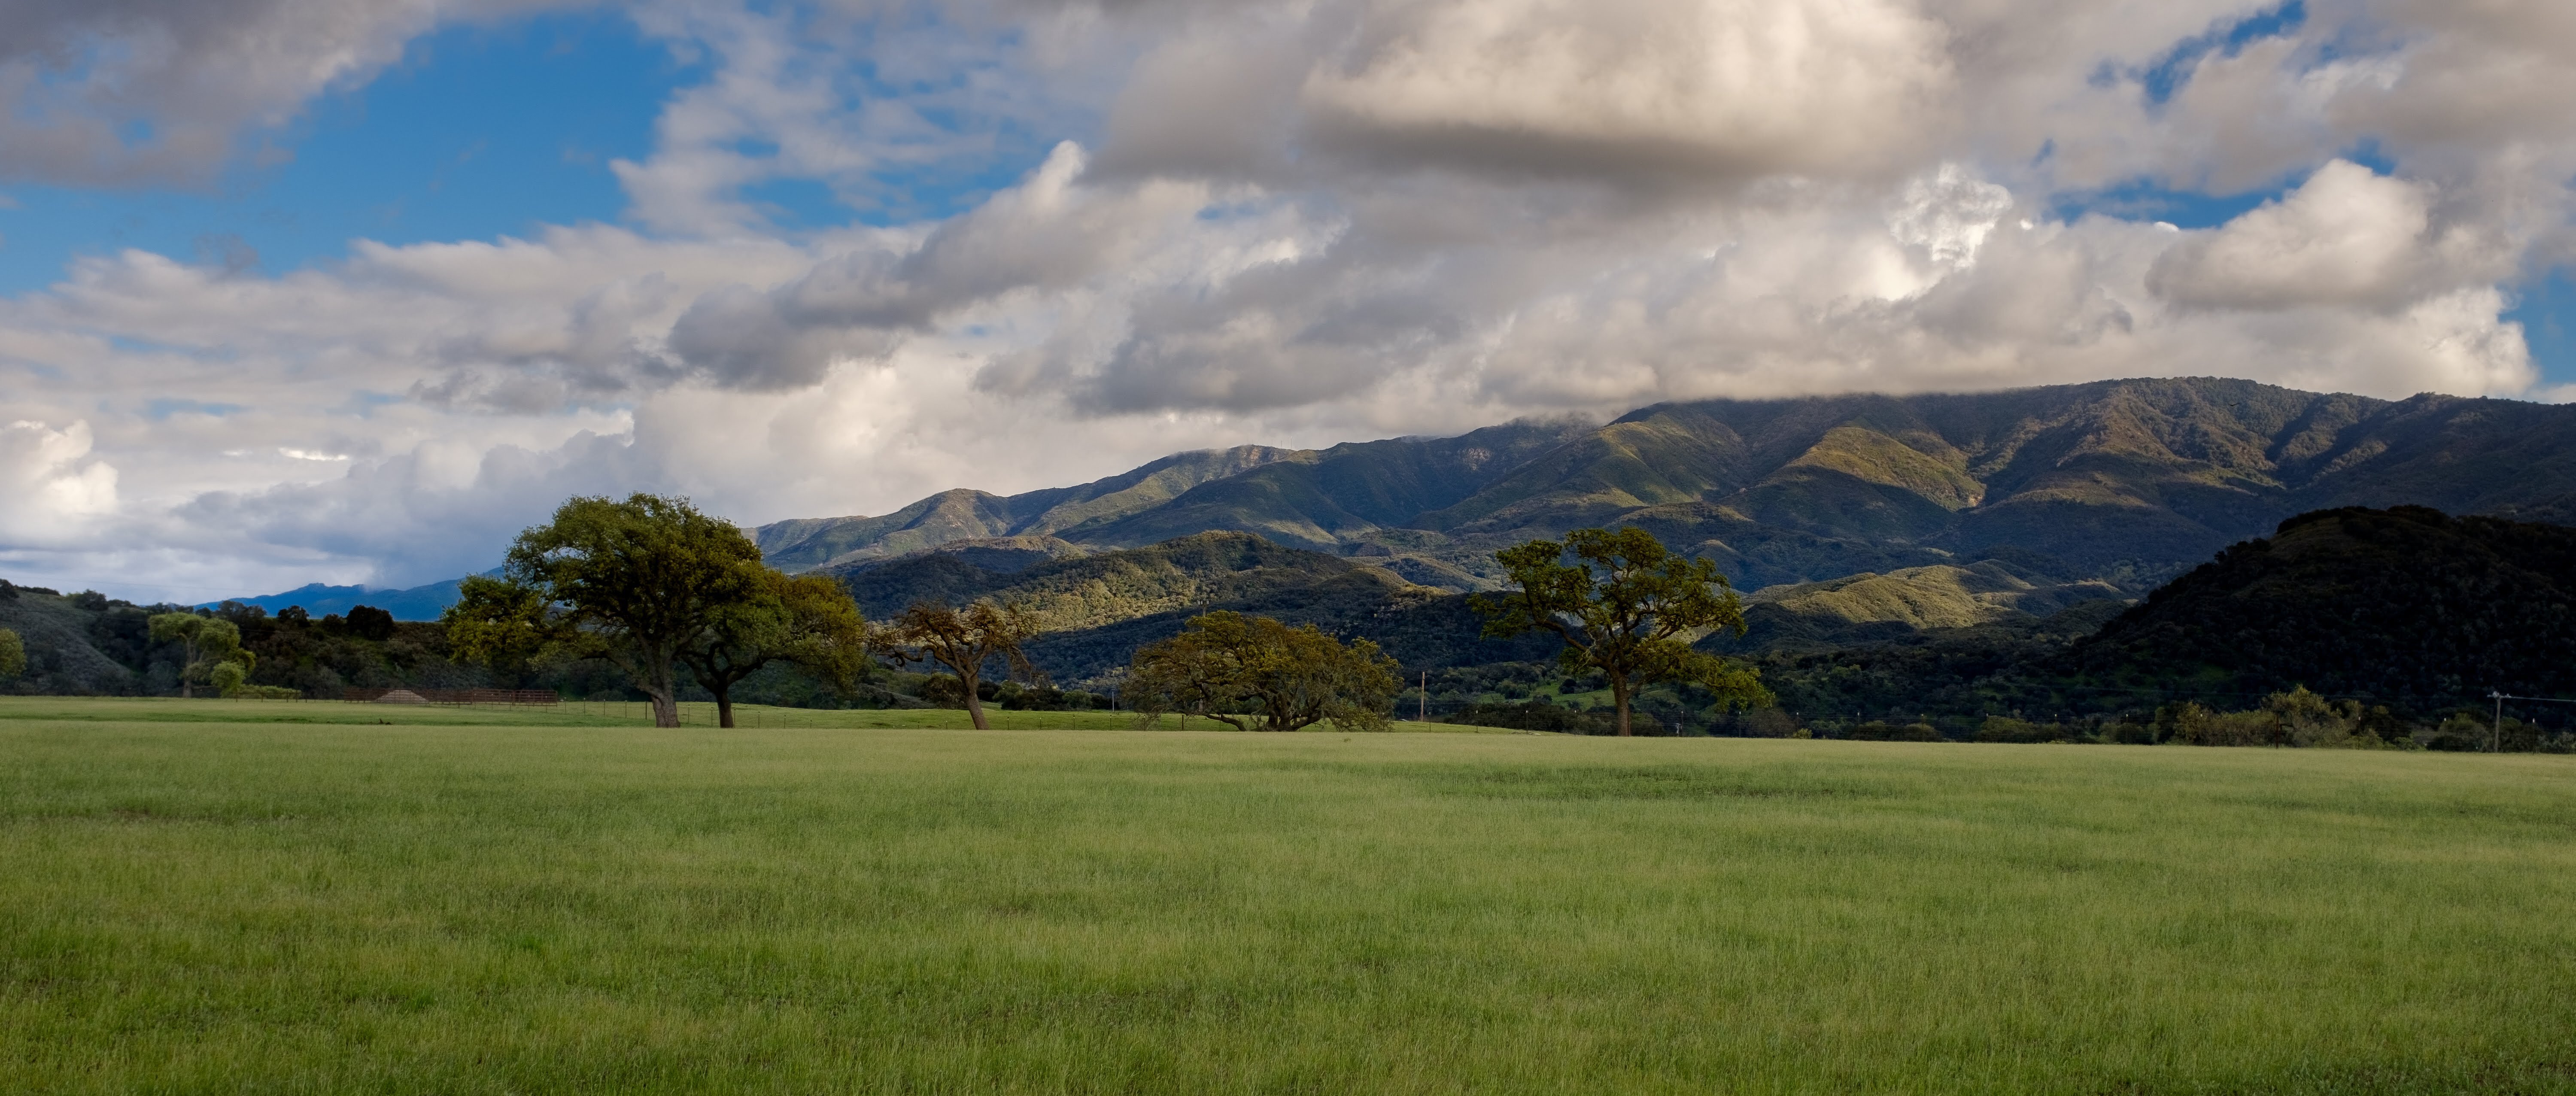 photo with flat green grass in foreground, oak trees, mountains in background, with blue sky and white clouds